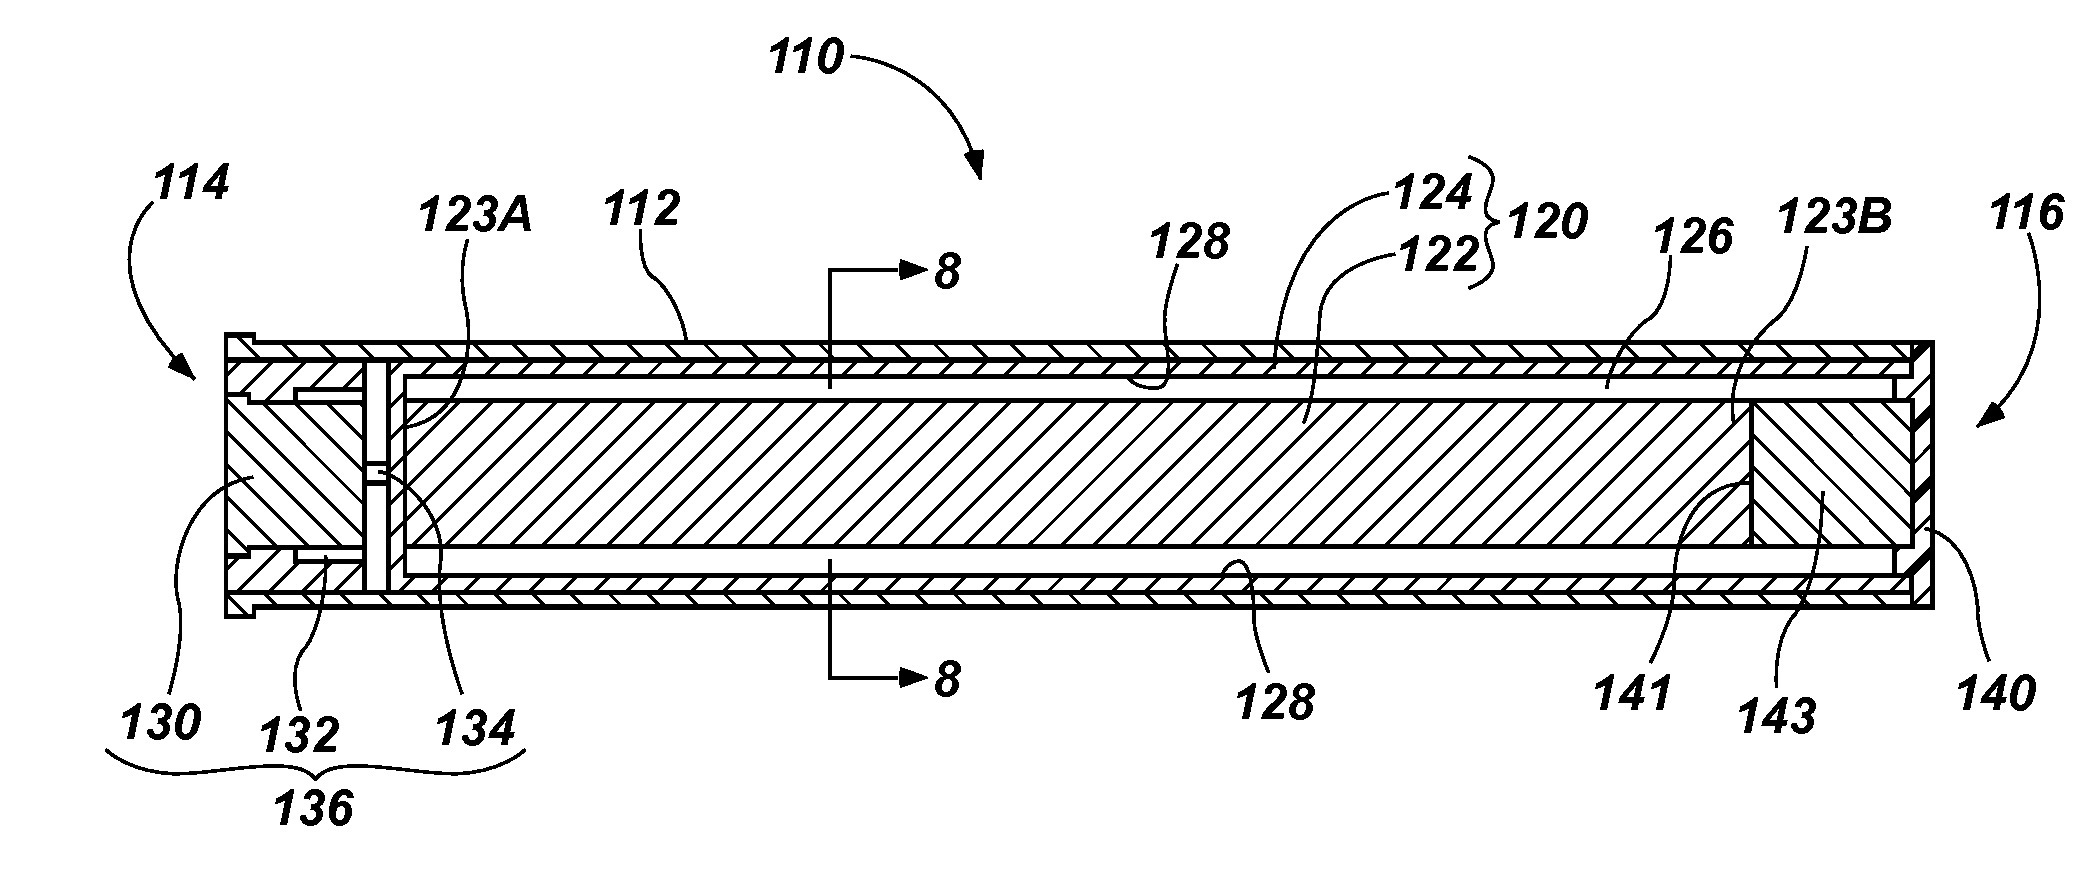 Flares, consumable weight components thereof, and methods of fabrication and use